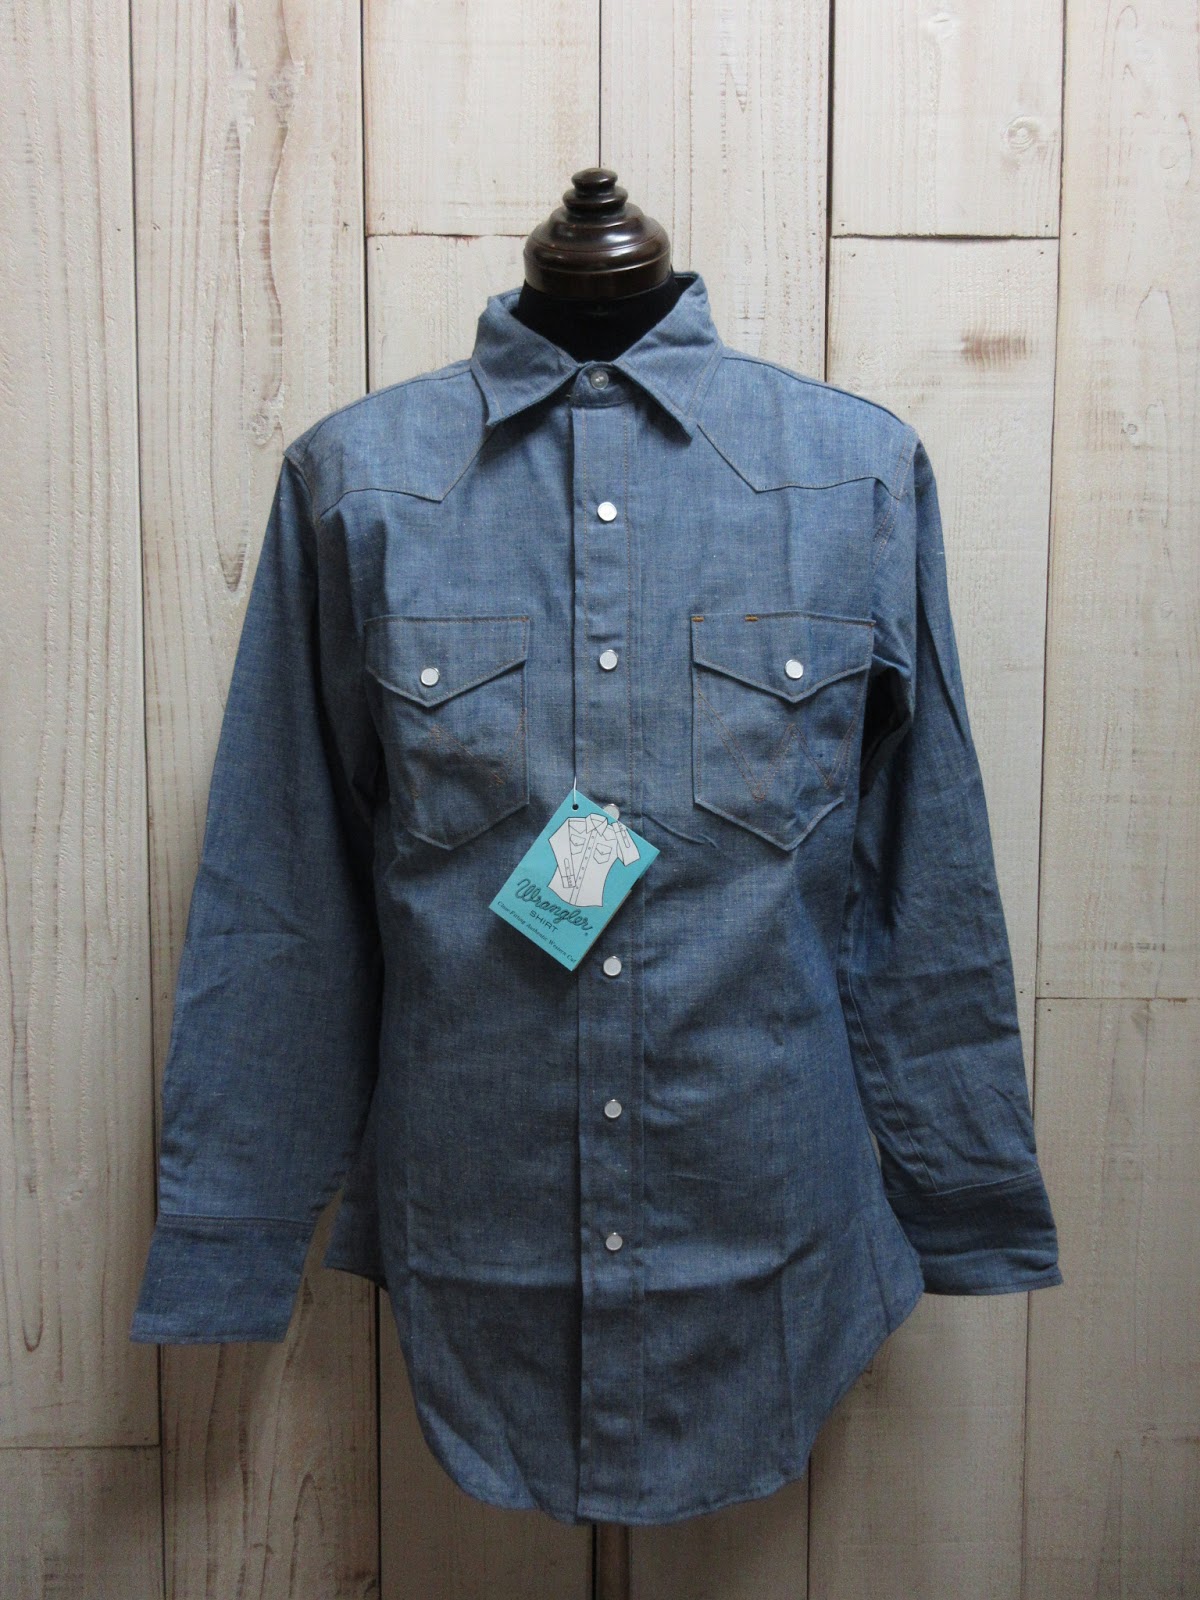 LITTLE REATA: Early 1960's Wrangler Chambray Western Shirts